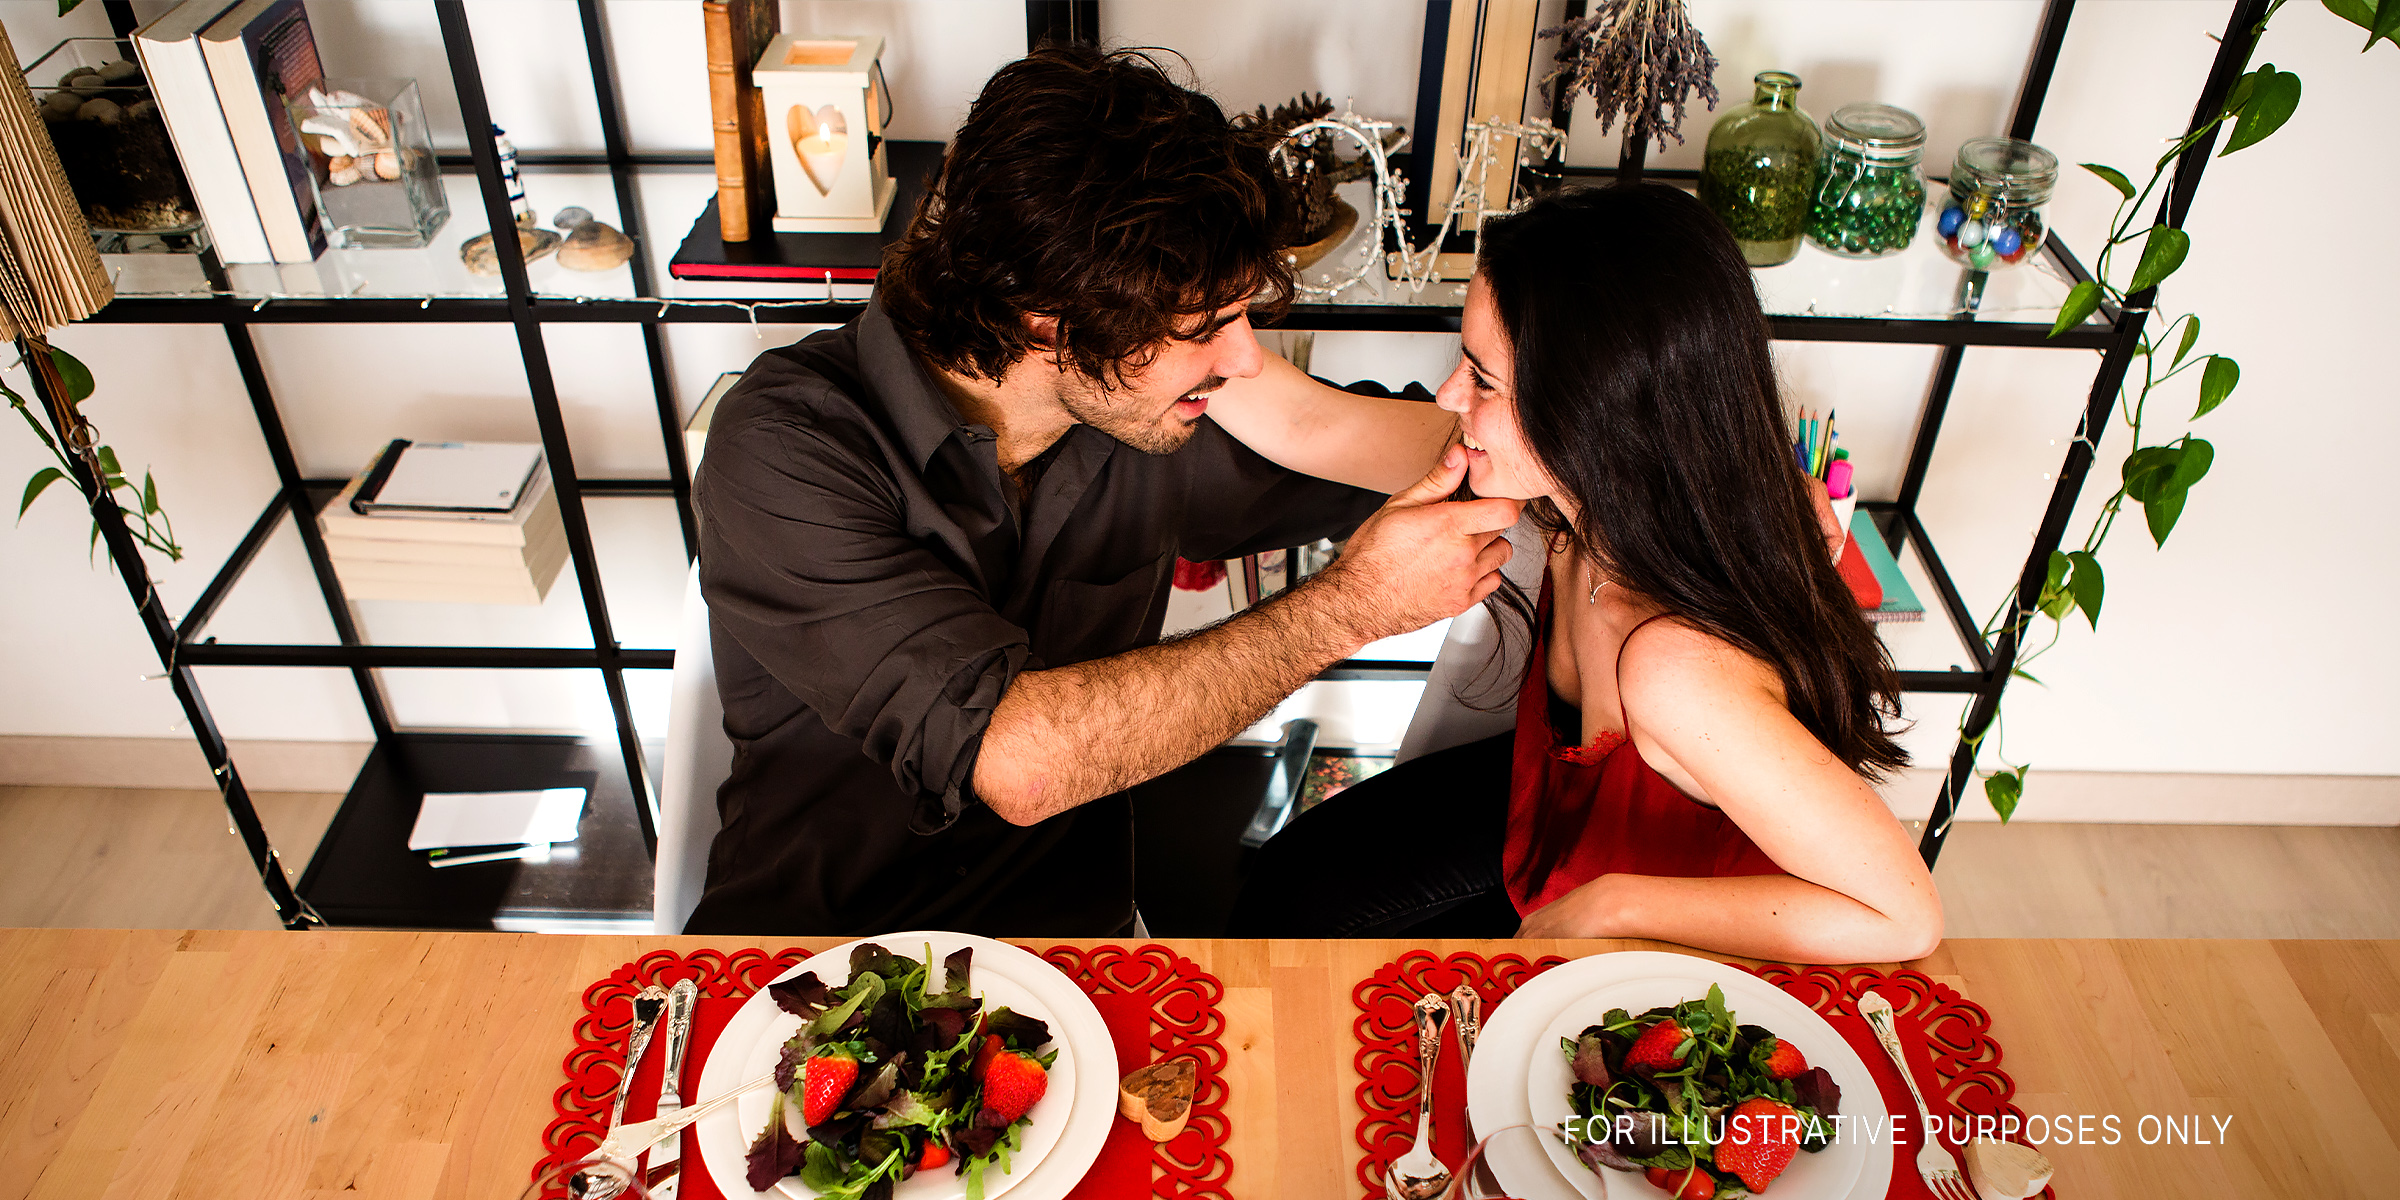 A couple touching while having a romantic dinner | Source: Flickr.com